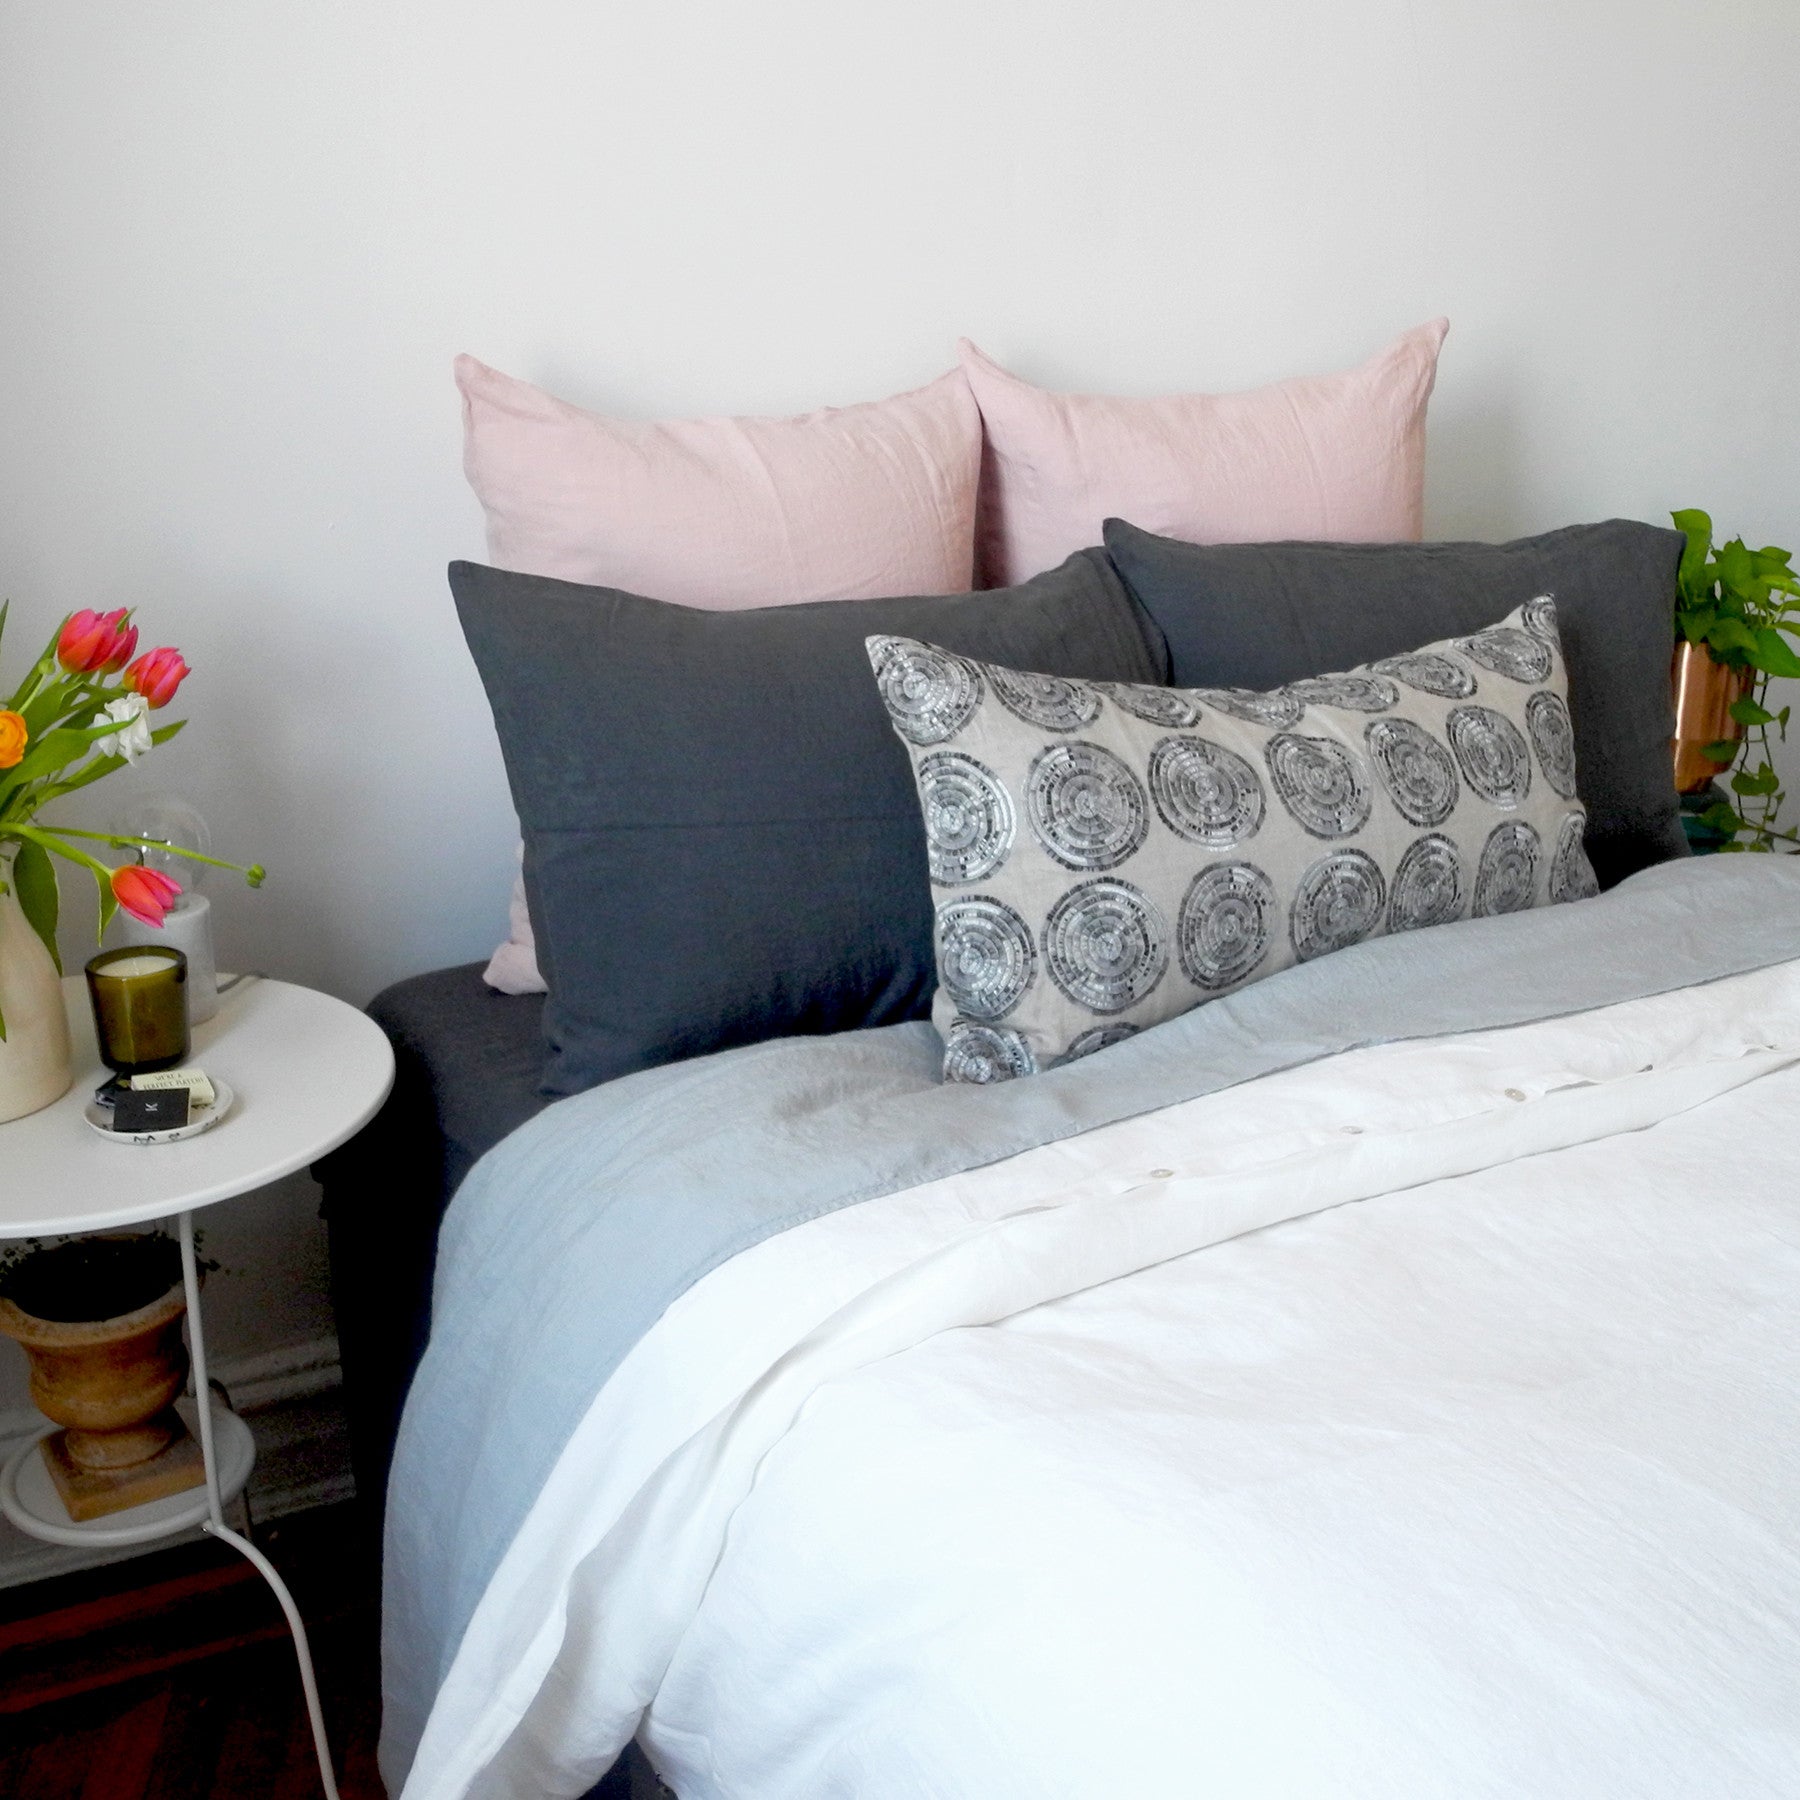 A Linge Particulier Linen Duvet in Off White gives a soft white neutral color to this duvet for a easy linen bedding look from Collyer&#39;s Mansion